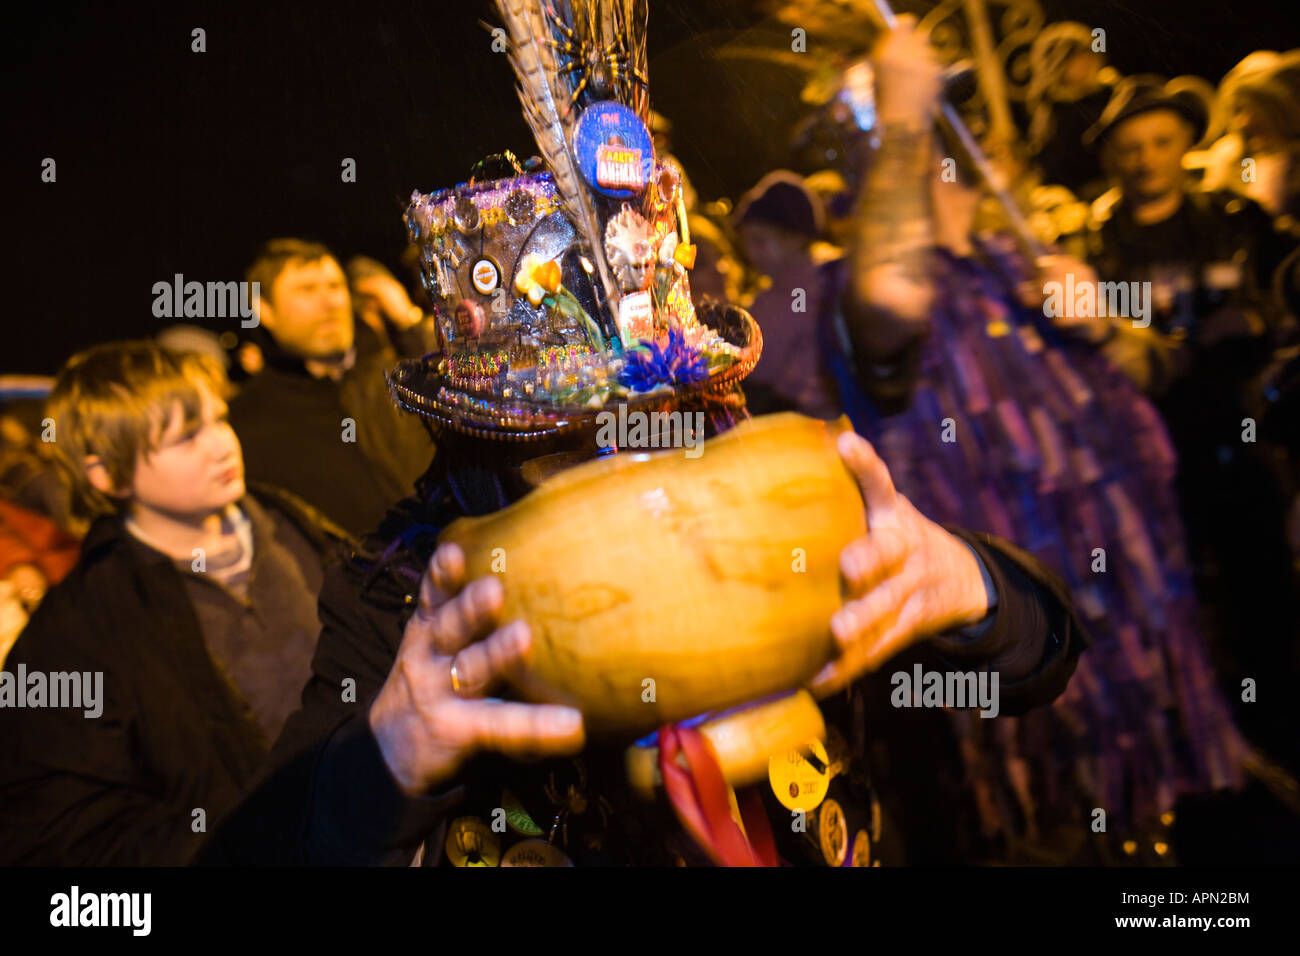 Drinking from the Wassail Bowl at tthe Chepstow Wassail and Mari Lwyd custom, Chepstow, Wales Stock Photo